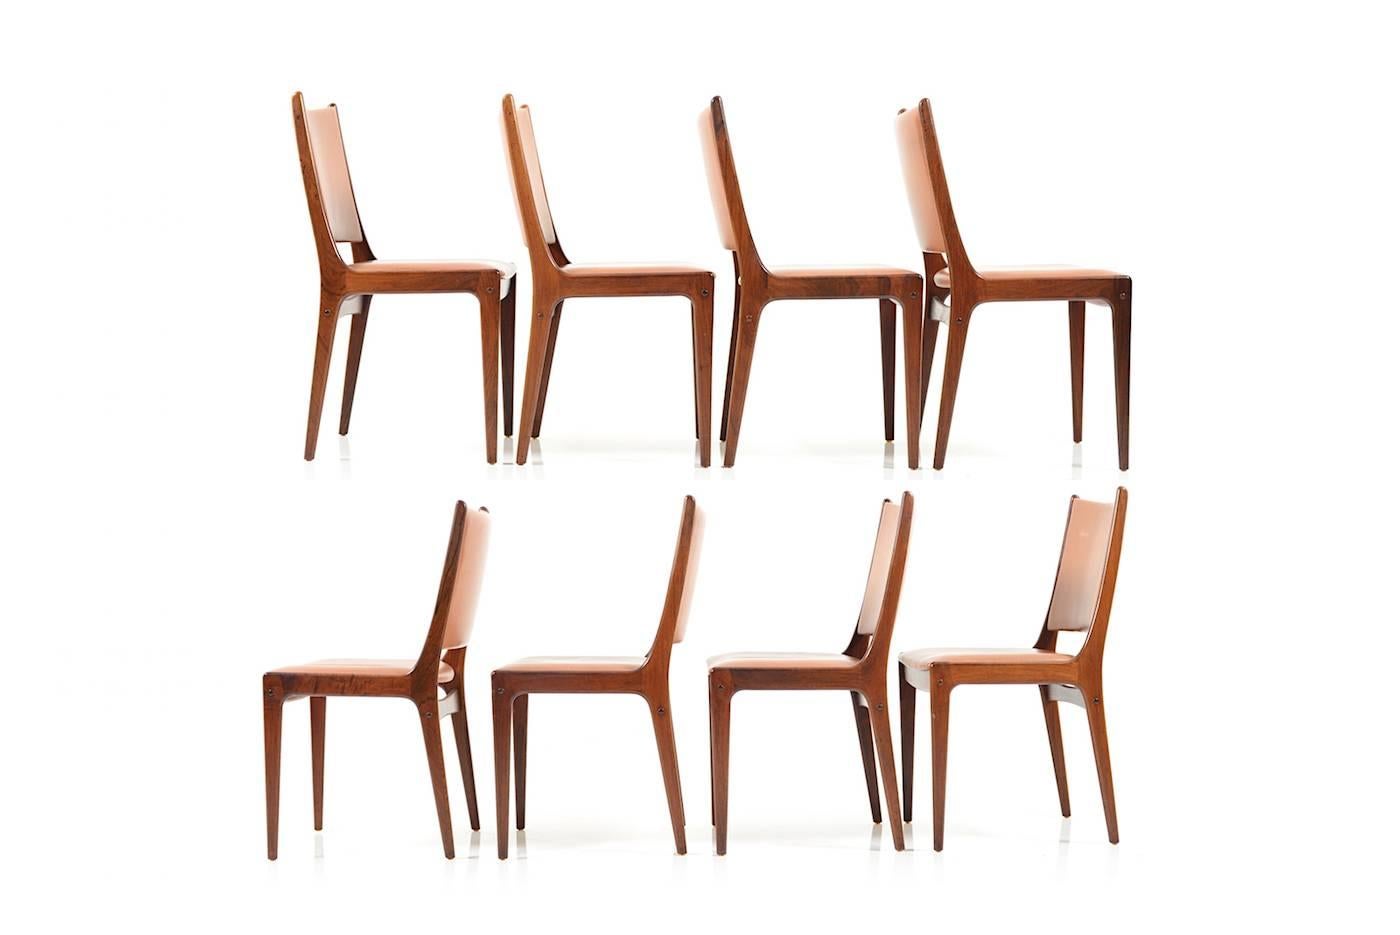 Mid-Century Danish rosewood dining chairs by Johannes Andersen for Uldum Møbelfabrik. Model UM85. Seats upholstery in original brown or cognac colored leather. Late 1960s.
Measurements; chairs: 43.0 x 45.0 x 85.0 cm (D x W x H), seat height: 45.0